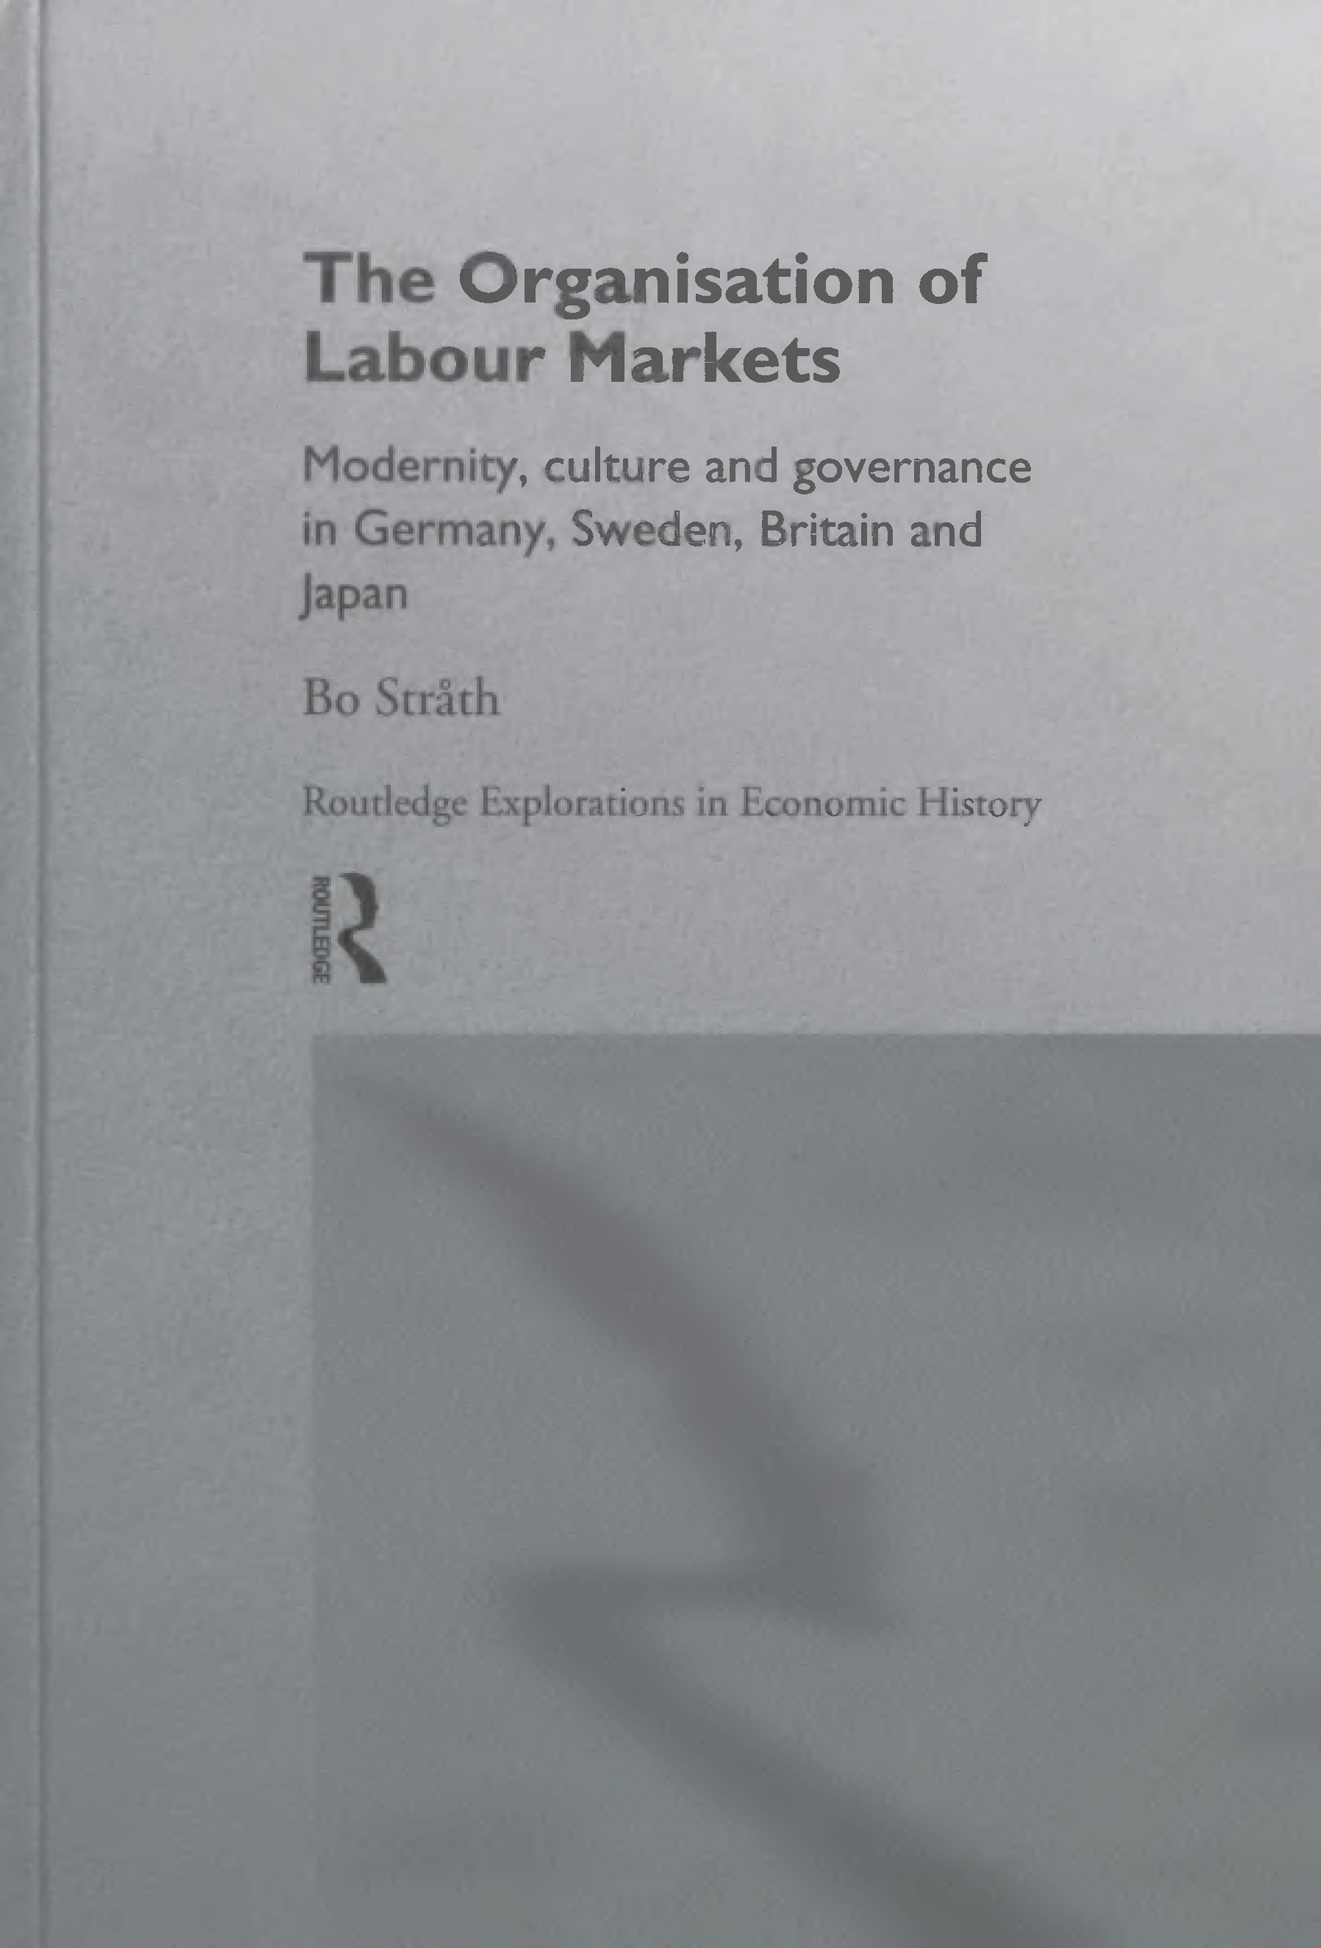 The Organisation of Labour Markets